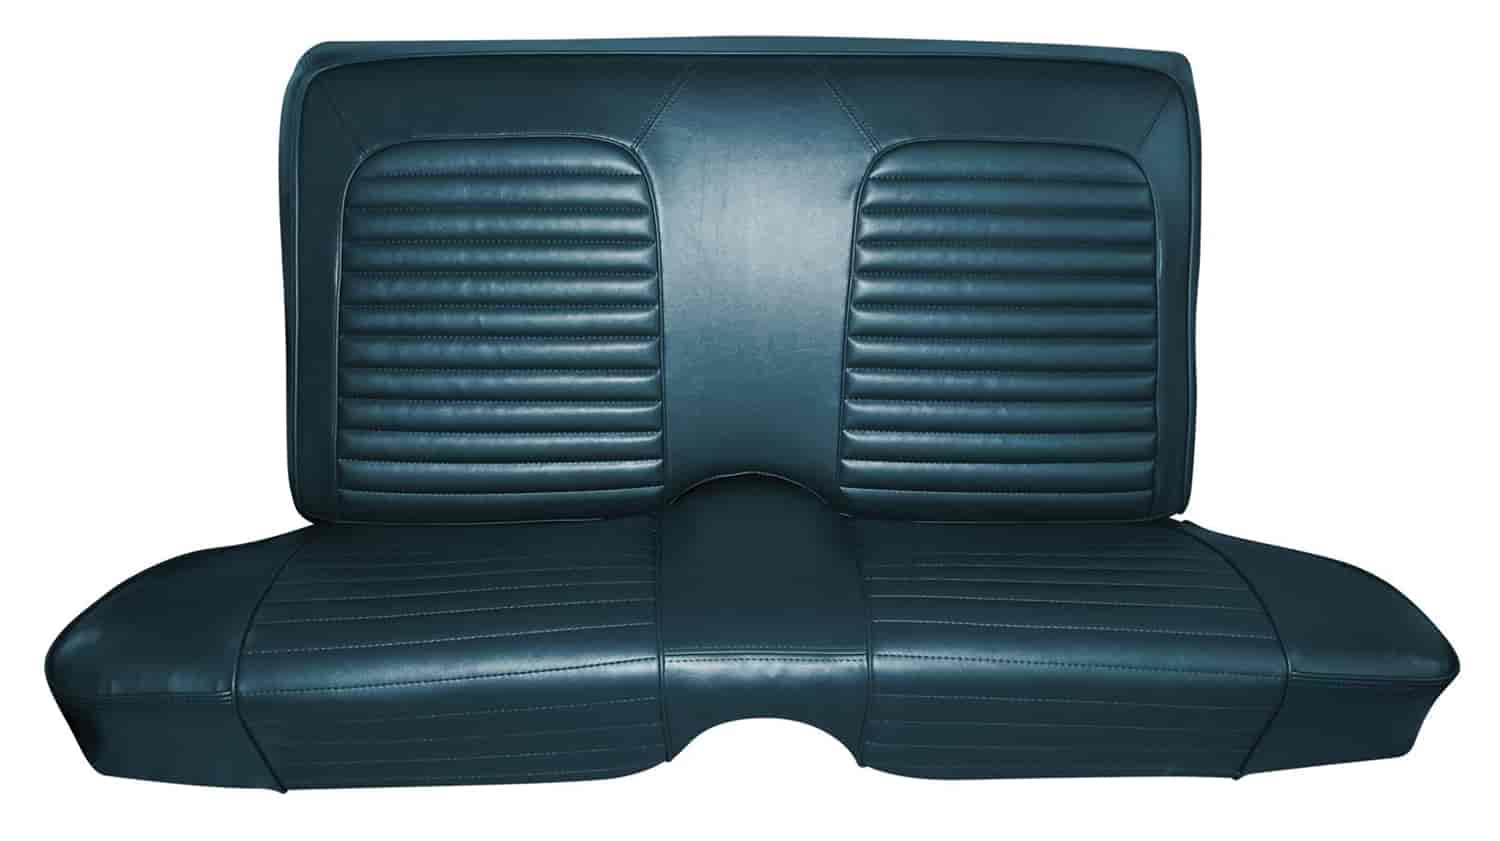 1963 Ford Falcon Futura Hardtop Interior with Front Bench Seat Front and Rear Upholstery Set